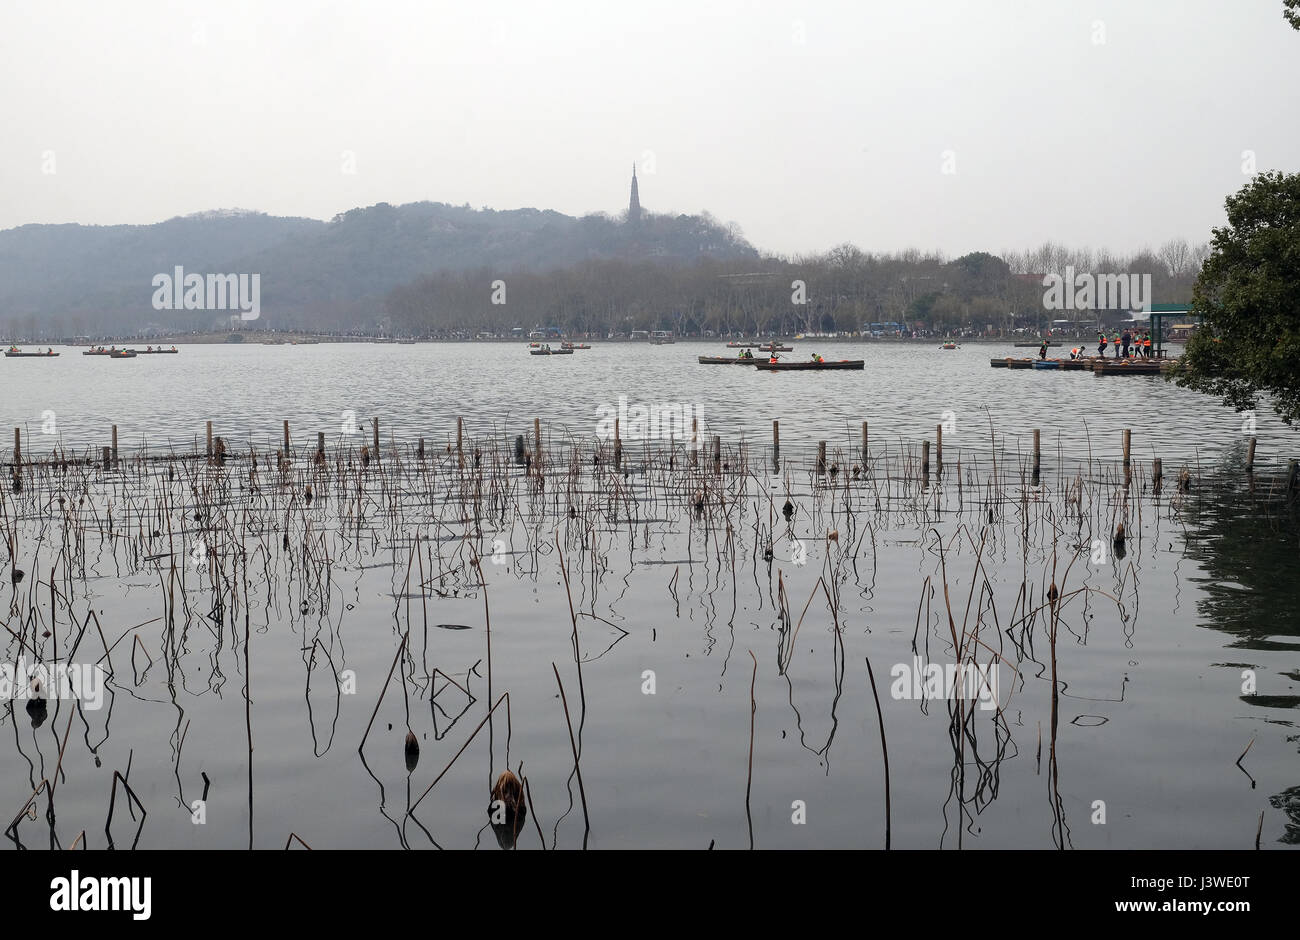 People are moving in boats on West lake in Hangzhou, China, February 21, 2016. Stock Photo